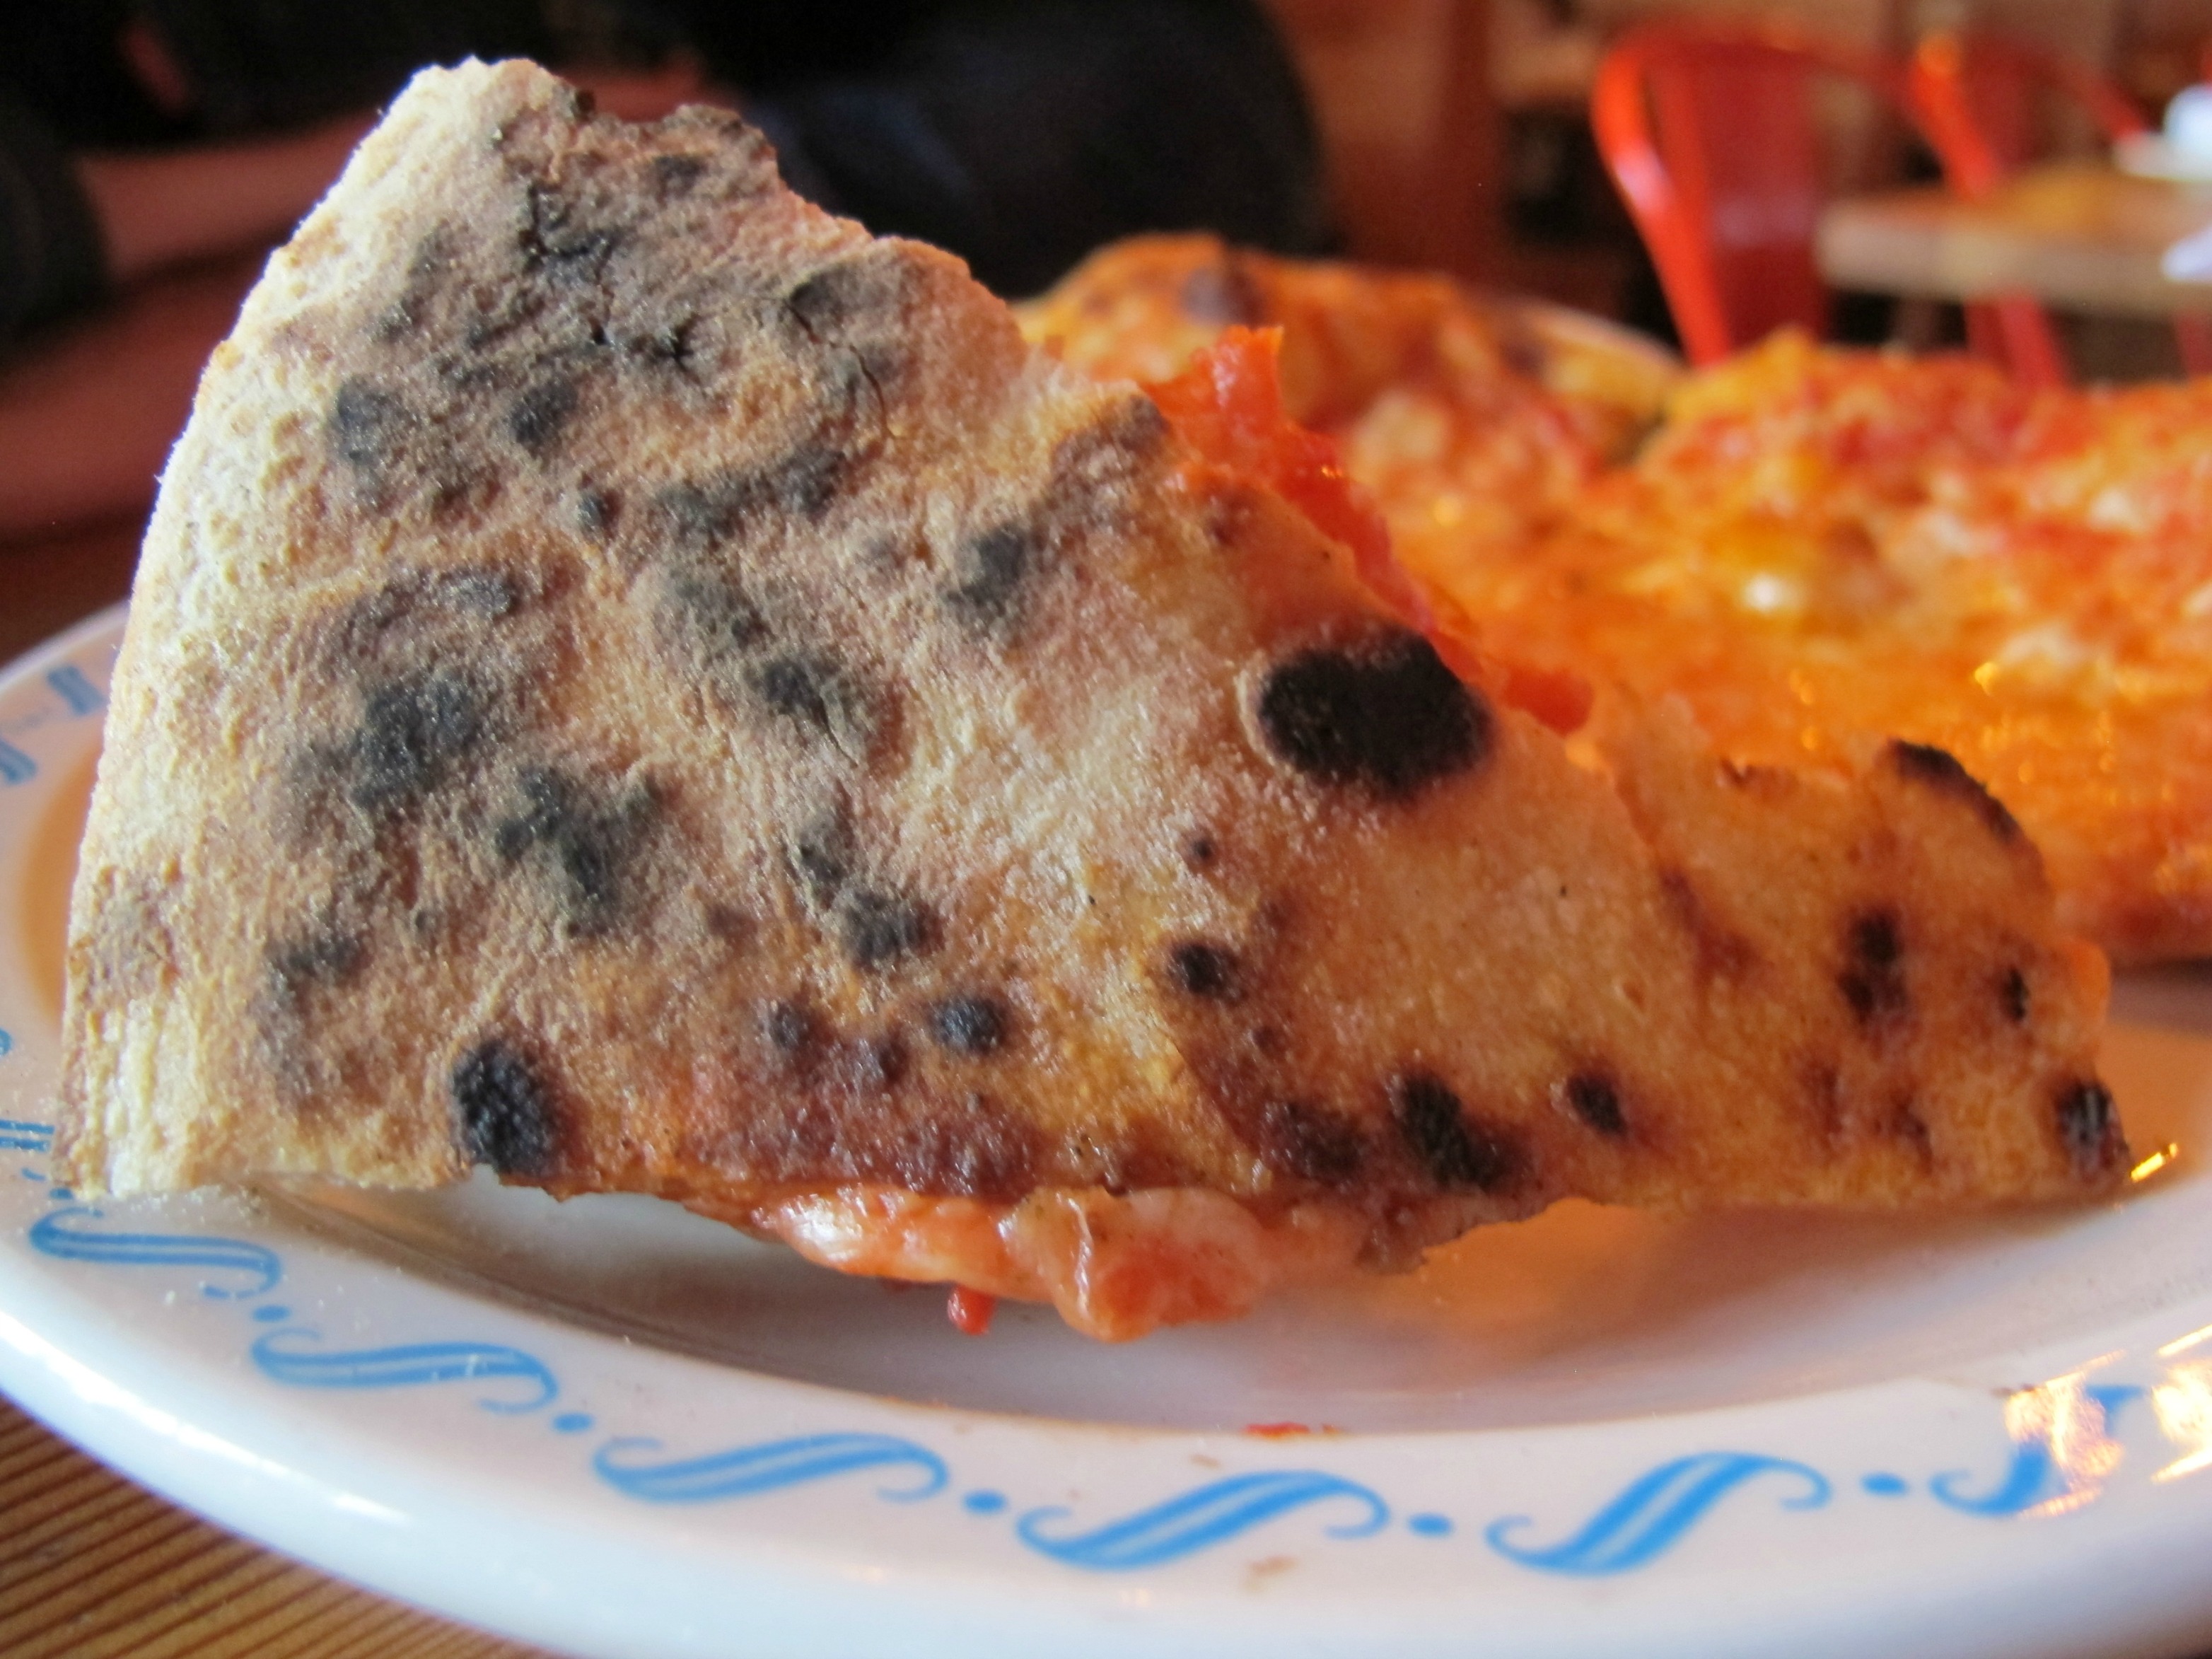 Charred crust on a slice of pizza from Lovely's Fifty Fifty in Portland, Oregon \ vegetarianPDX